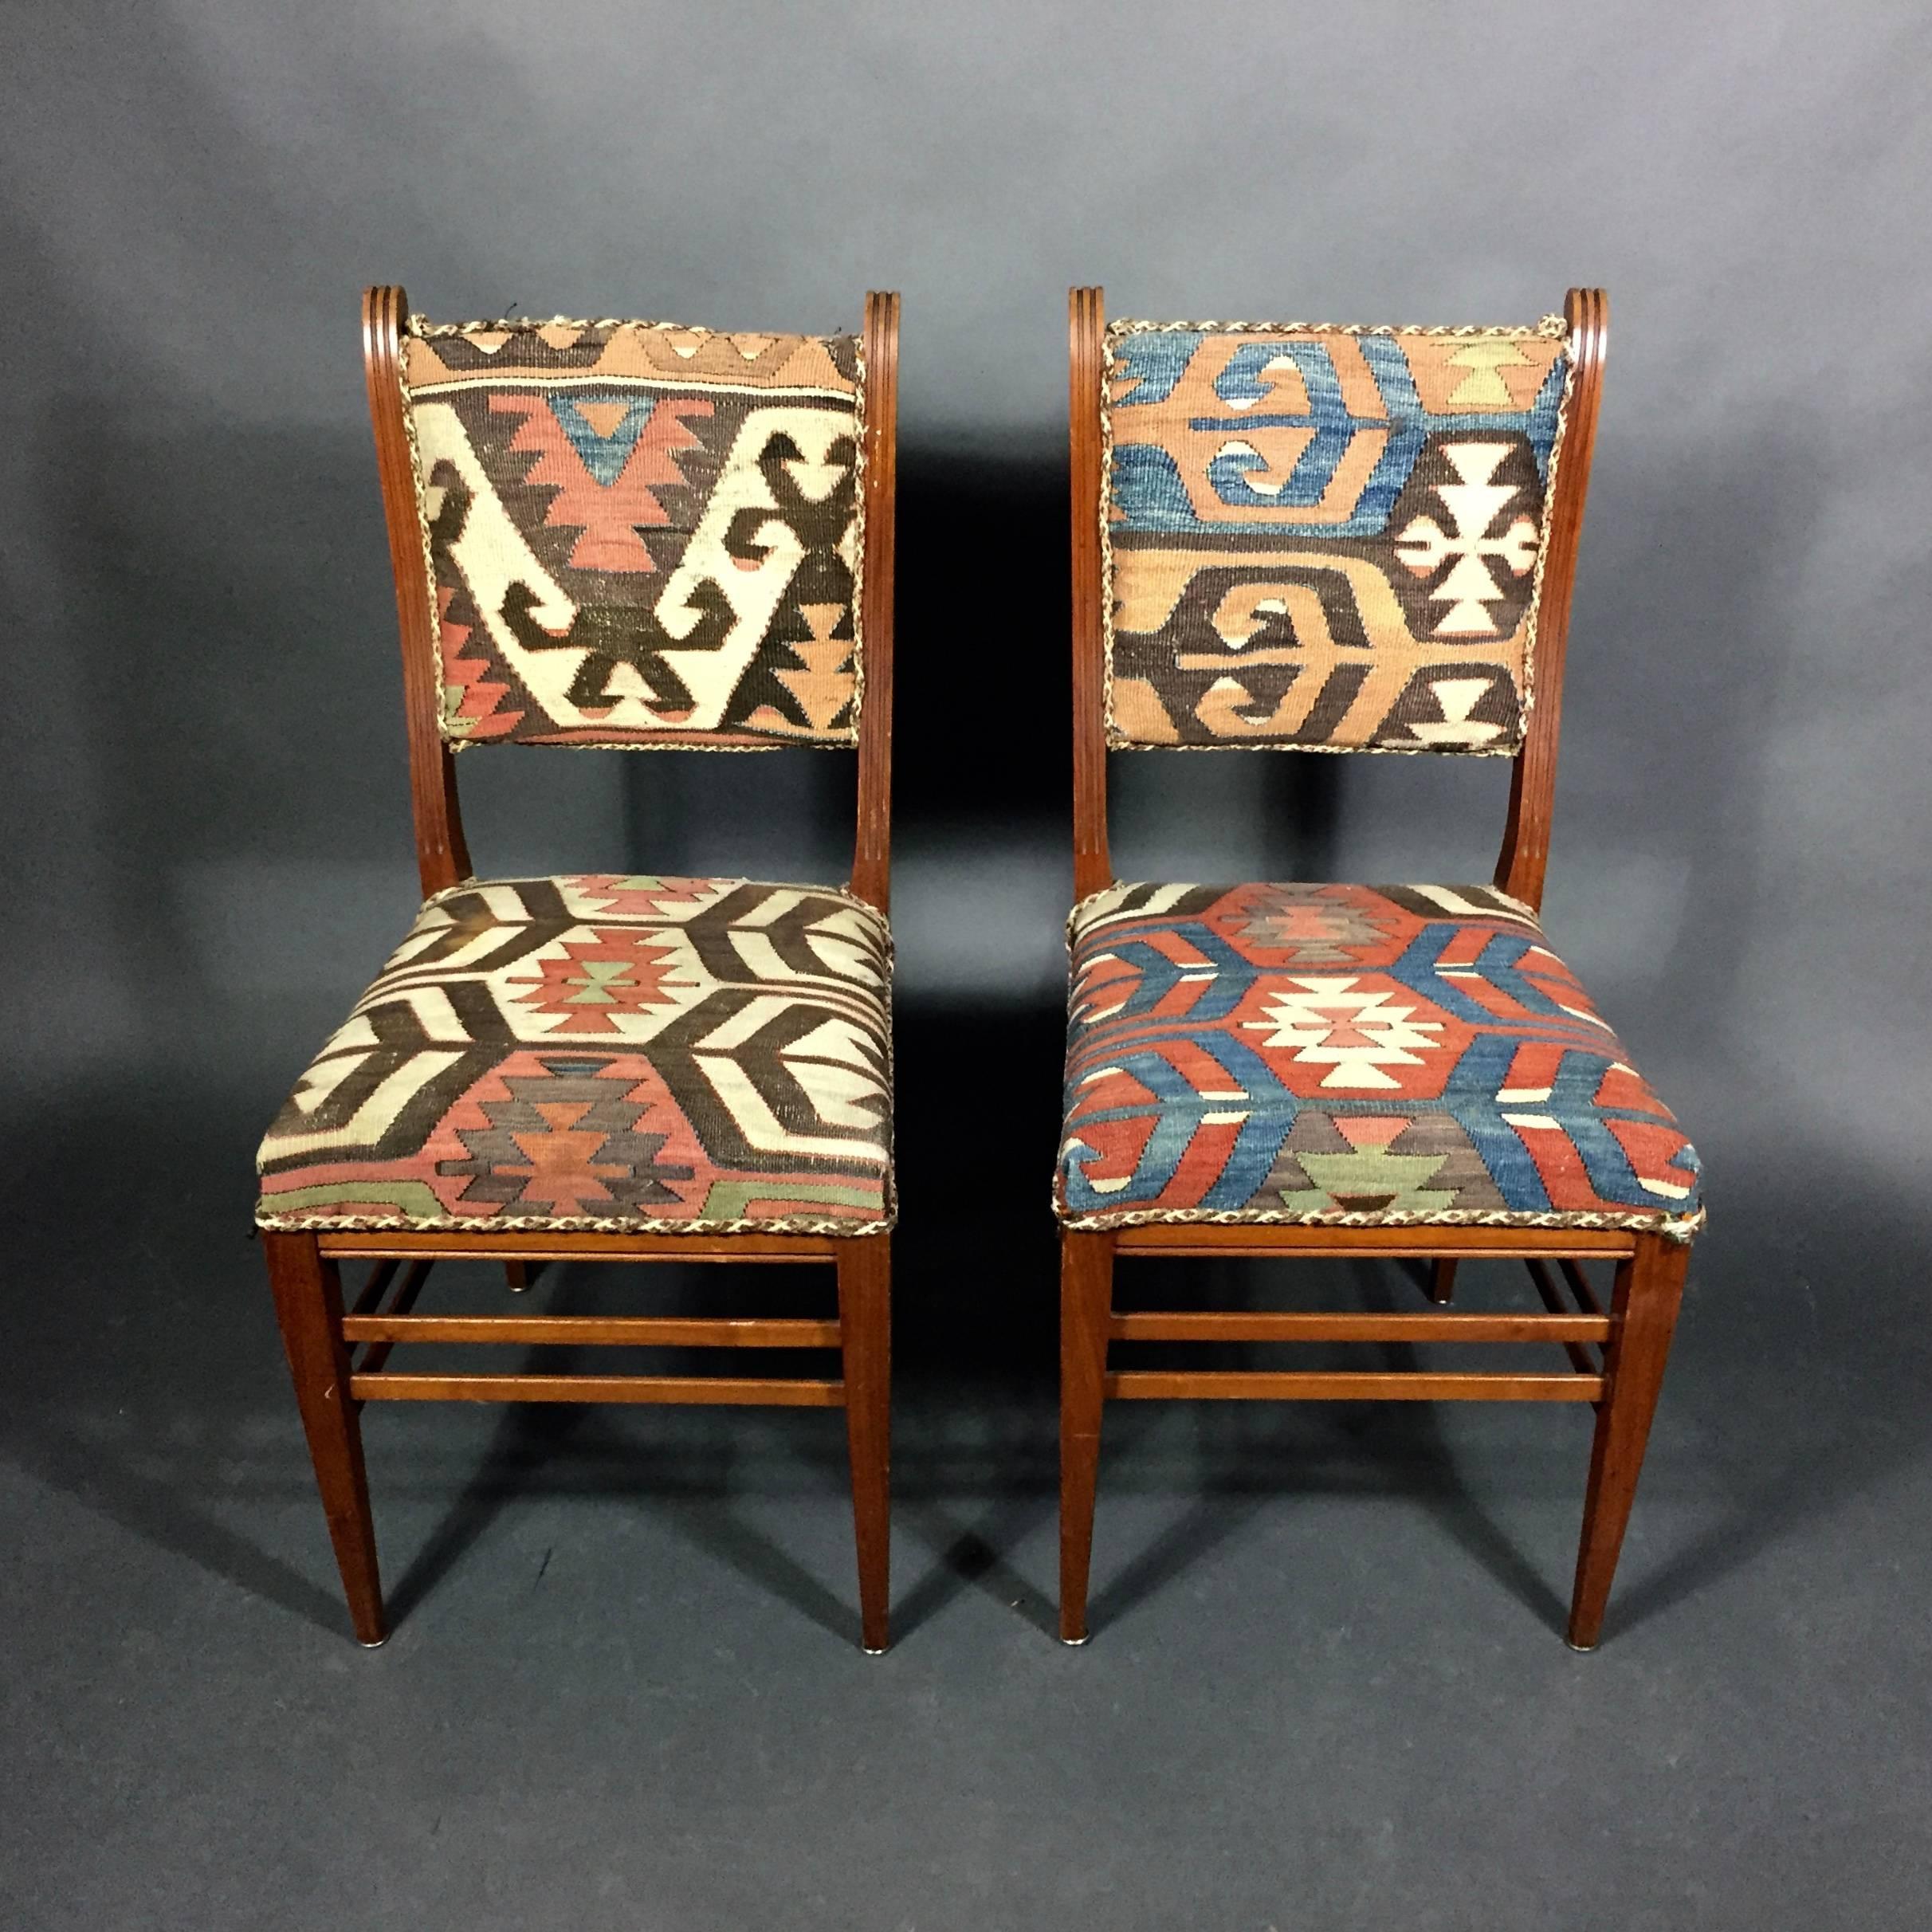 Set of Kilim Covered Mahogany Chairs, Sweden, circa 1900 For Sale 1